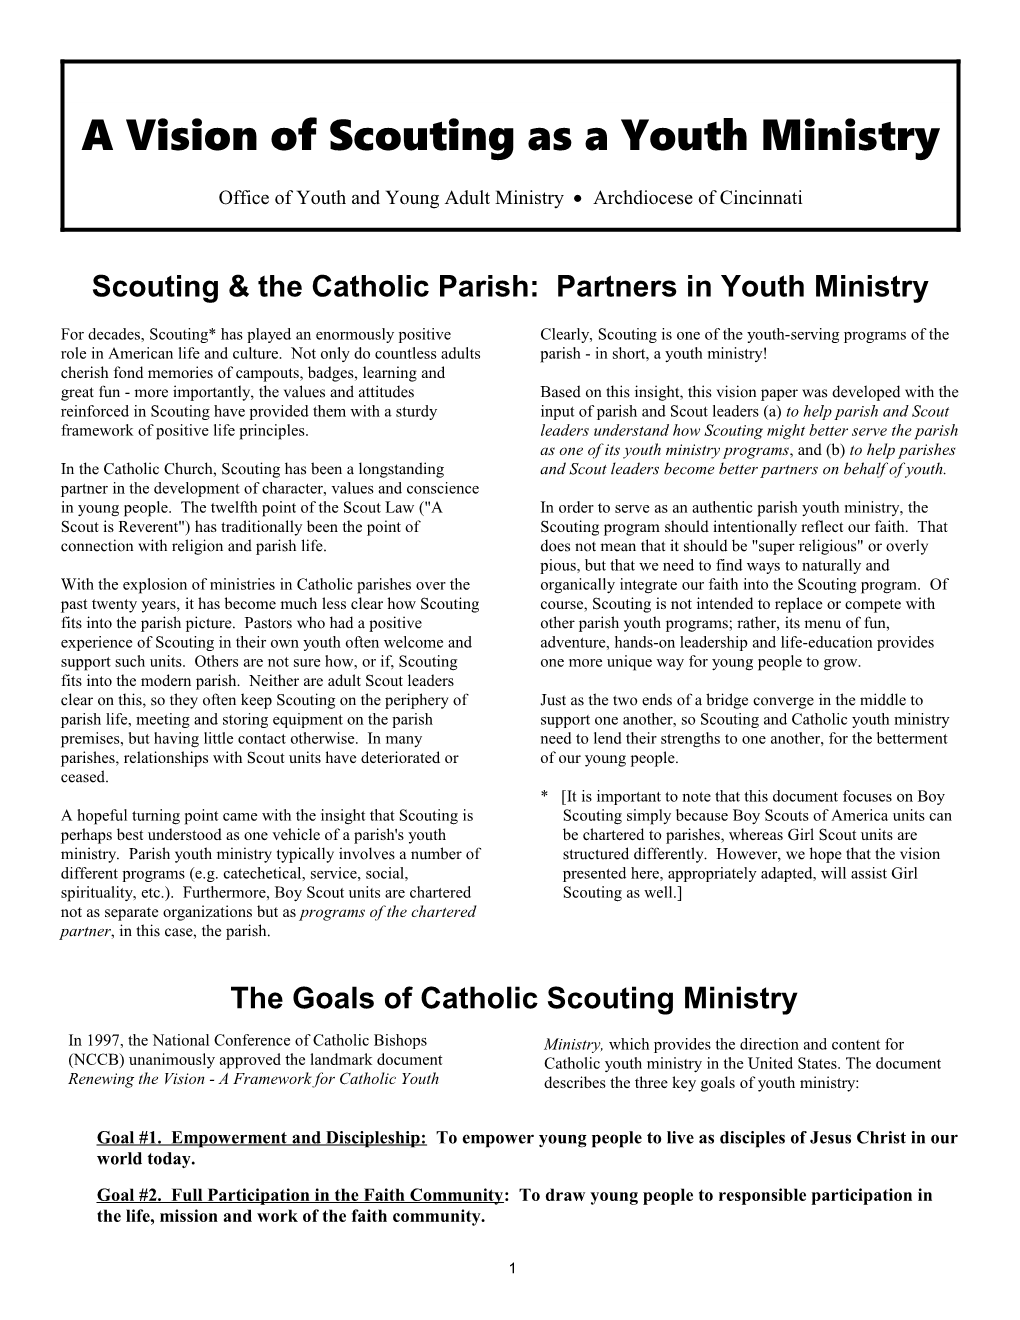 Scouting & the Catholic Parish: Partners in Youth Ministry